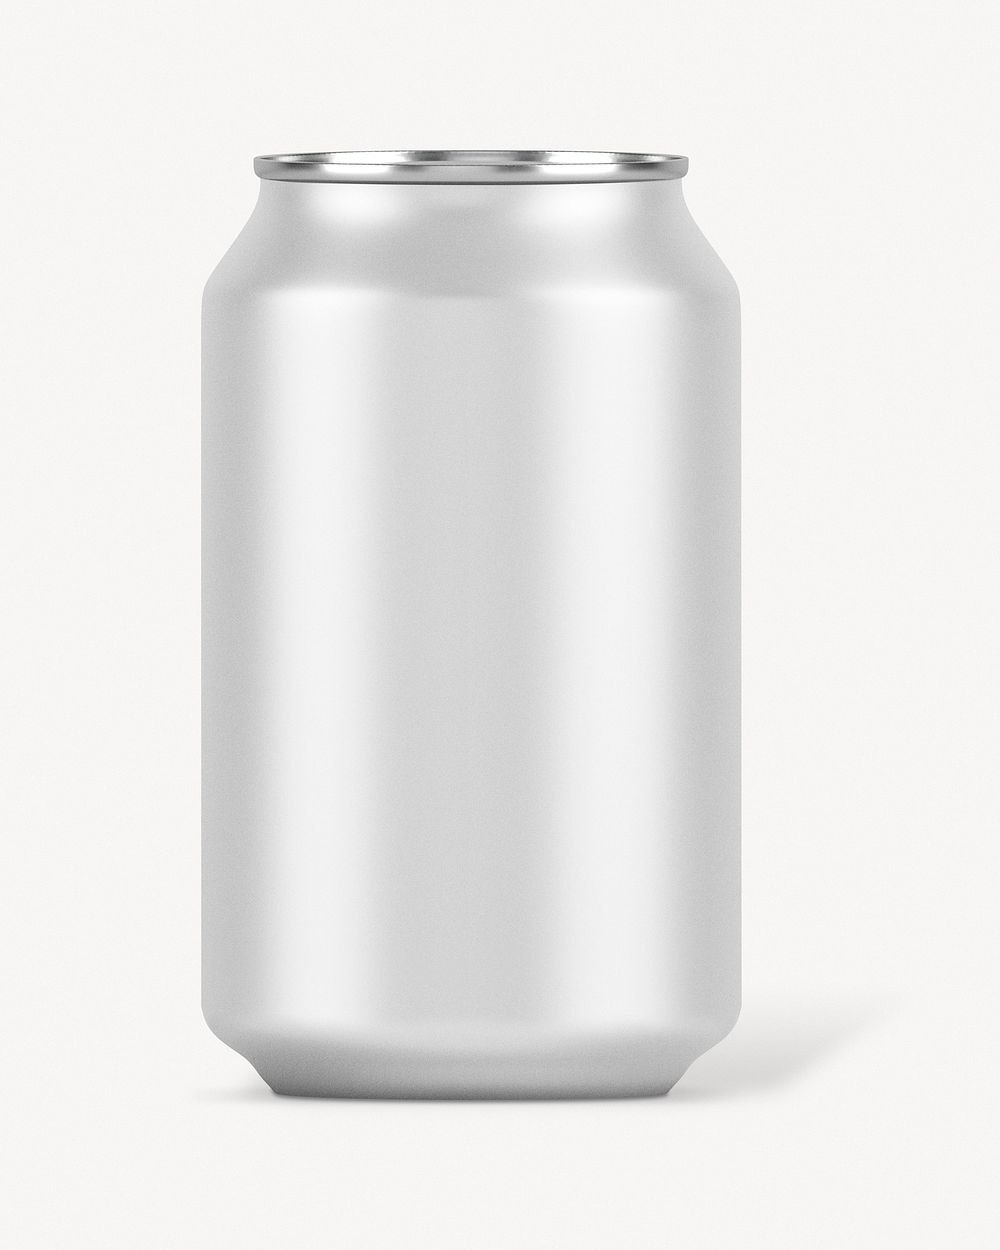 Aluminum beer can collage element image